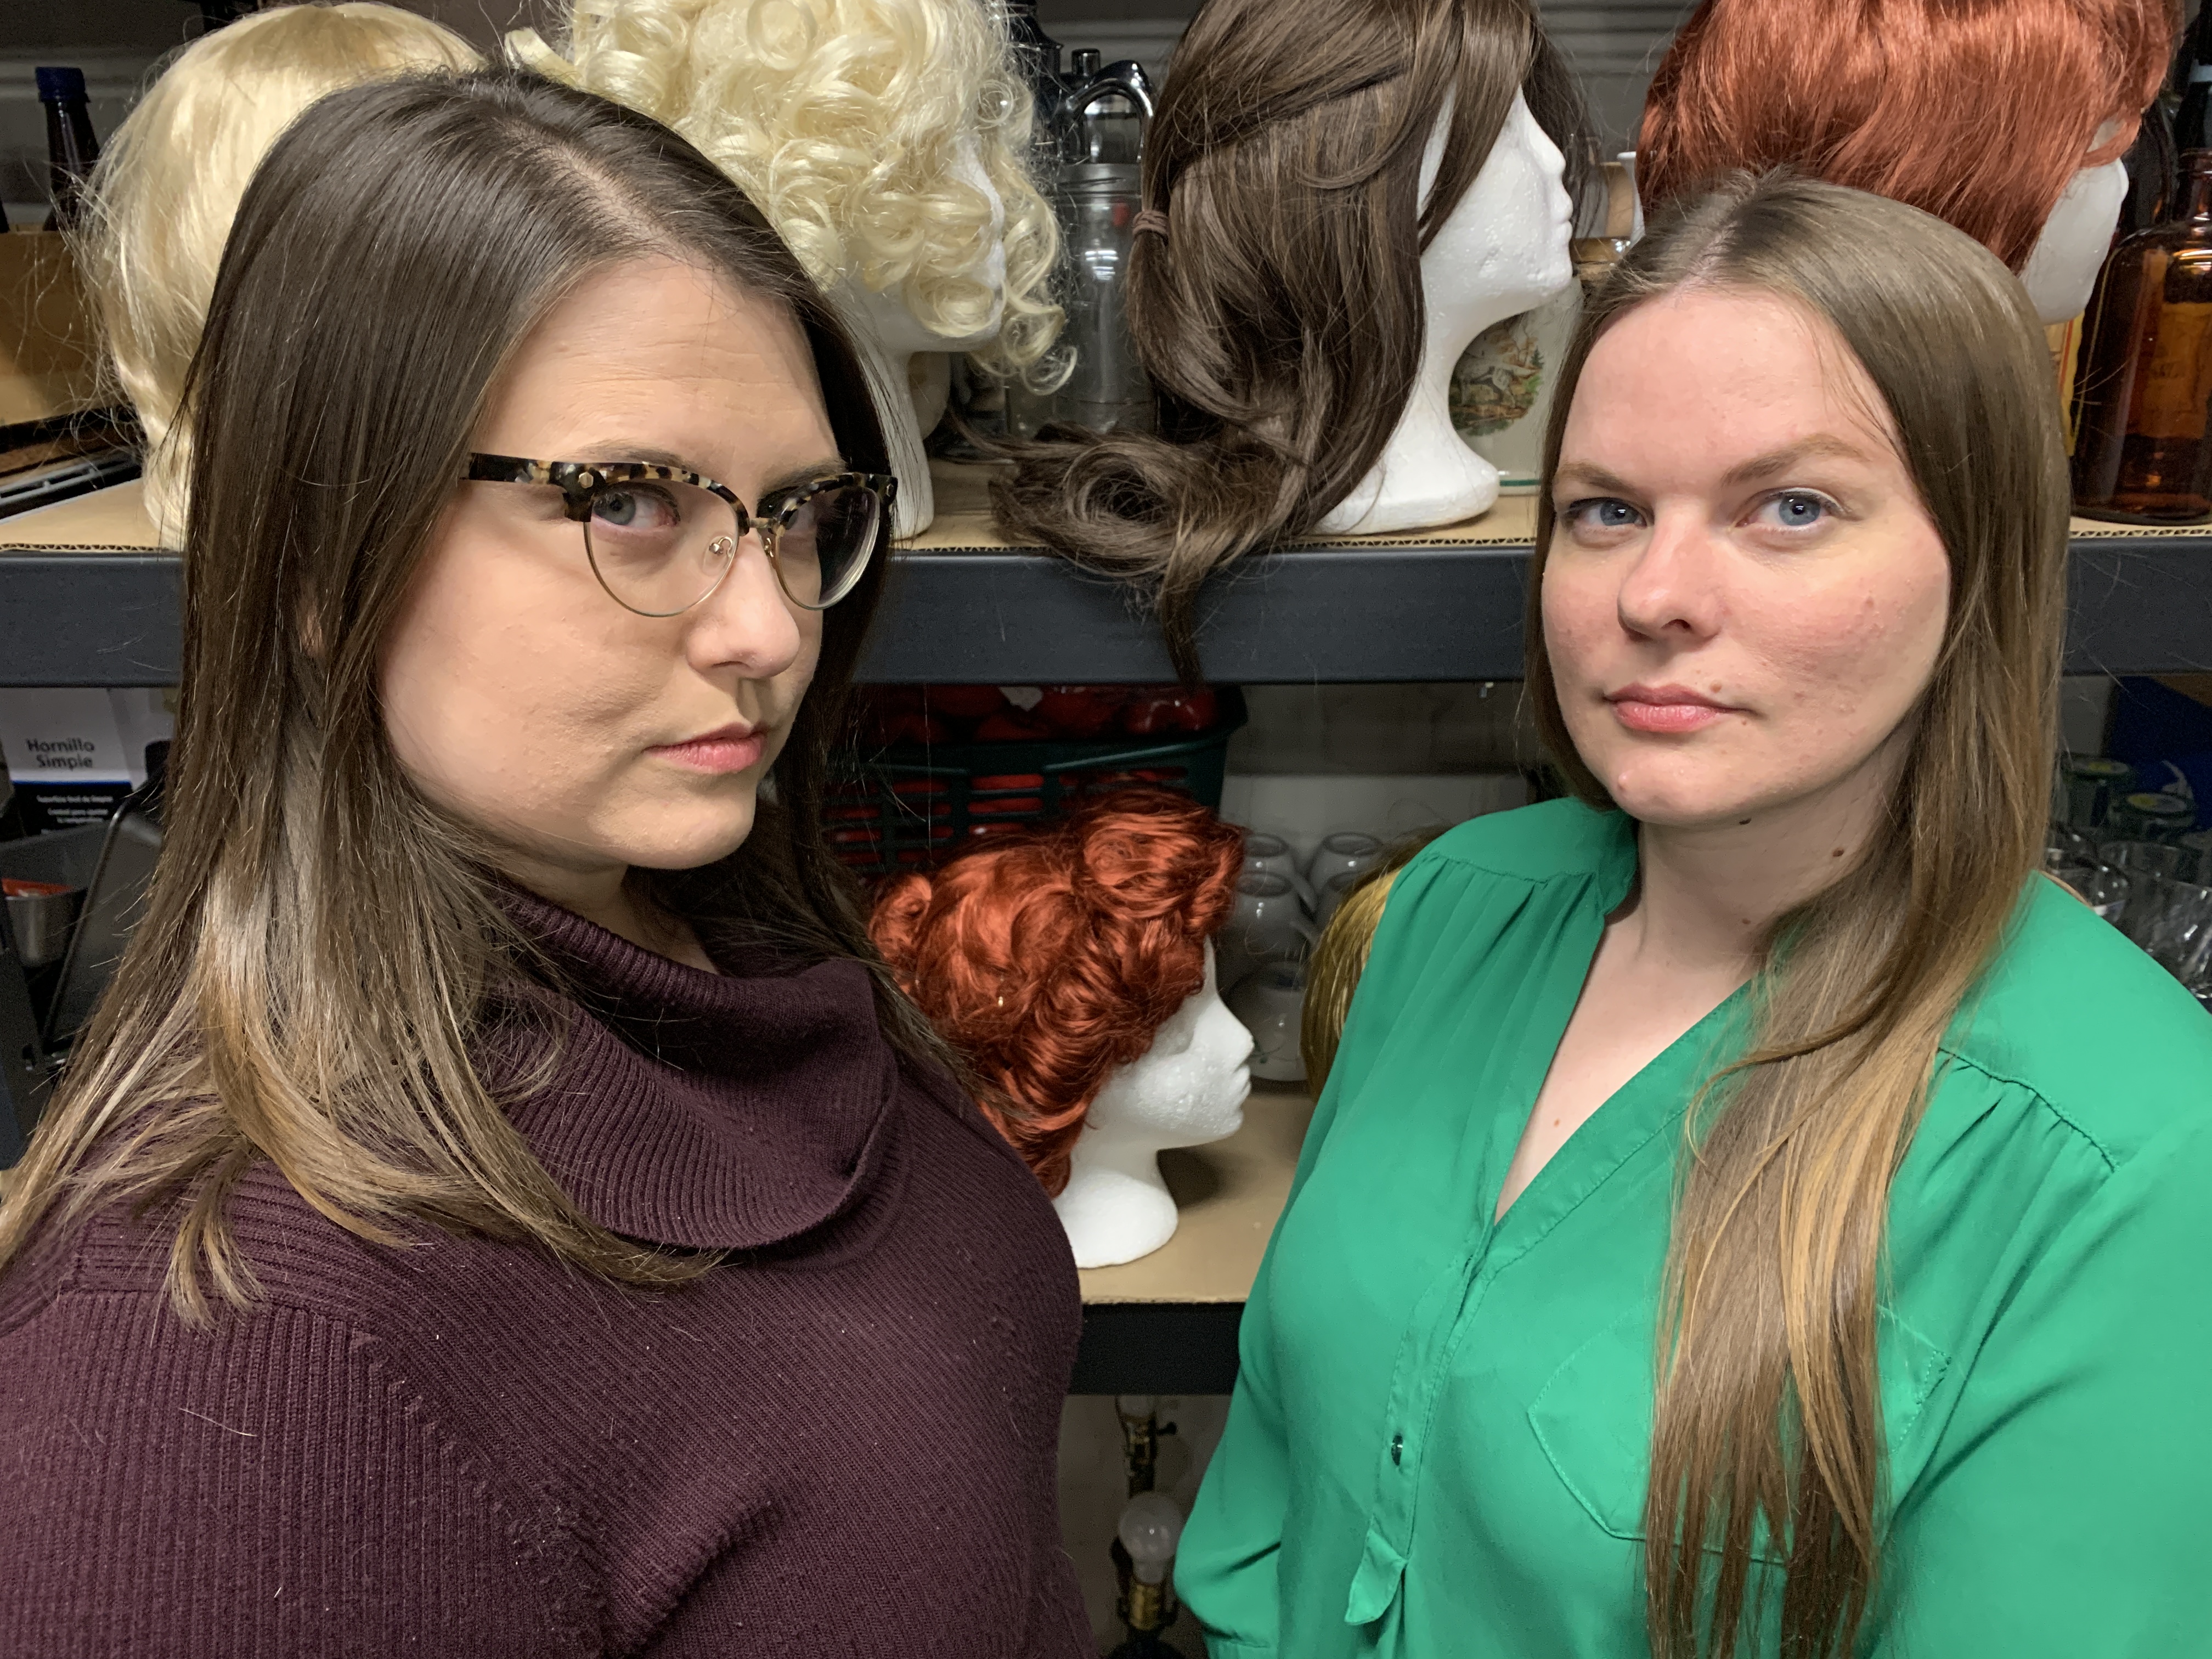 The dynamic duo of Miss Holmes revealed -- women of mystery no longer! Pictured left to right: Maggie Wachtl who portrays as Dr. Dorothy Watson; and Phoebe Sanborn as the daring detective Miss Sherlock Holmes.